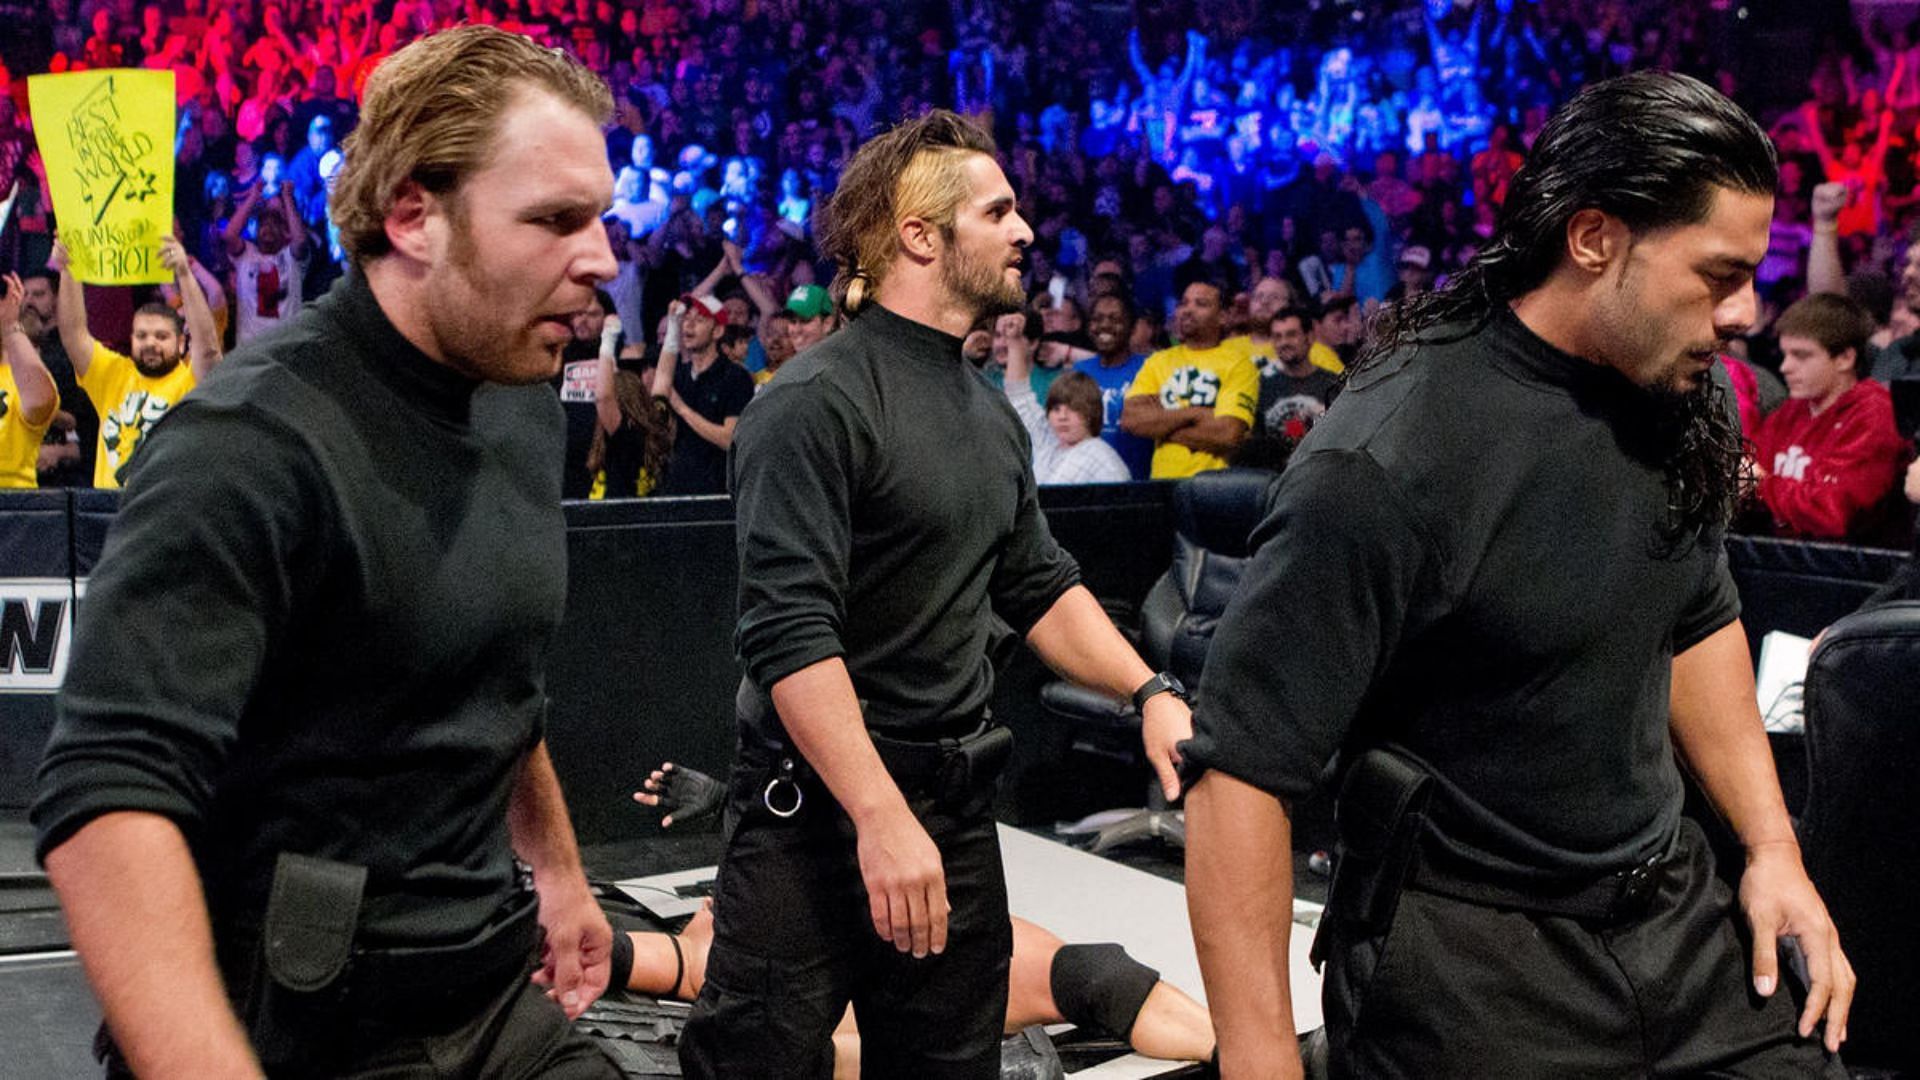 Roman Reigns, Seth Rollins, and Dean Ambrose (aka Jon Moxley) of The Shield